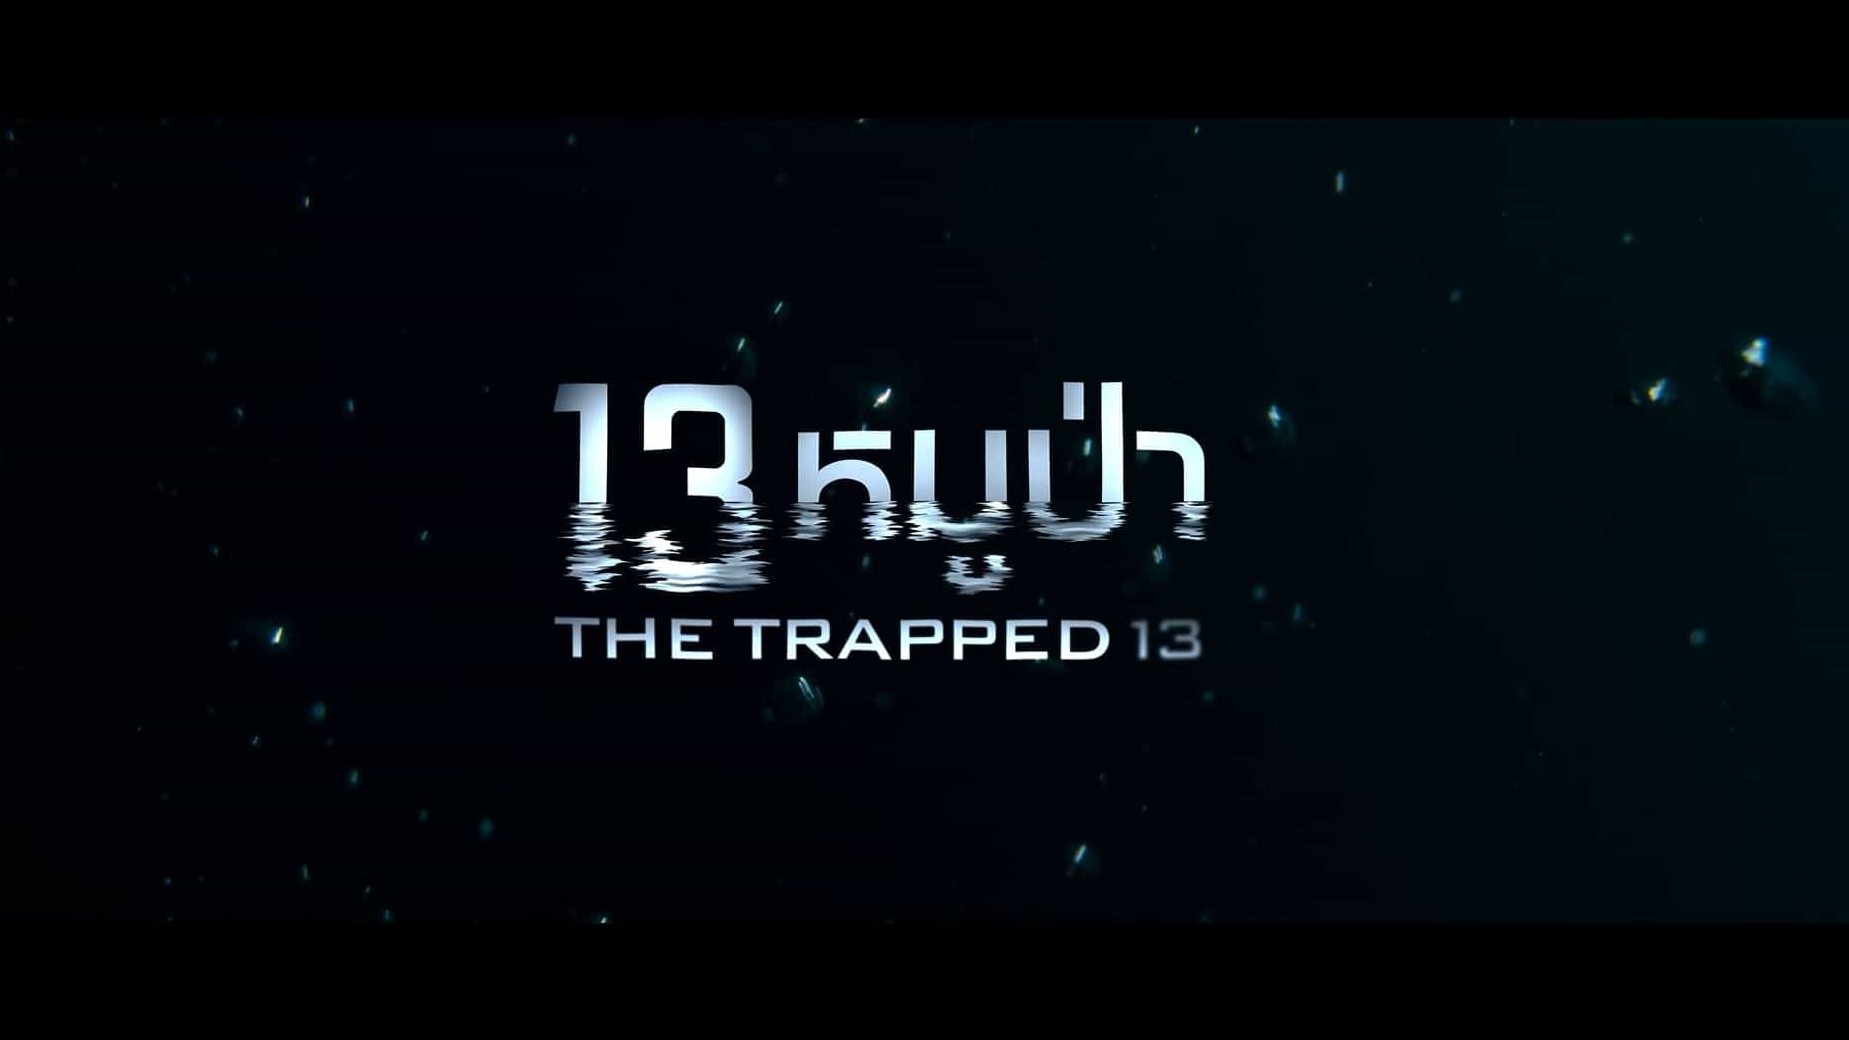 Netflix纪录片《受困13人：我们的泰国洞穴生还录 The Trapped 13: How We Survived The Thai Cave 2022》全1集 英语中字 1080P高清网盘下载